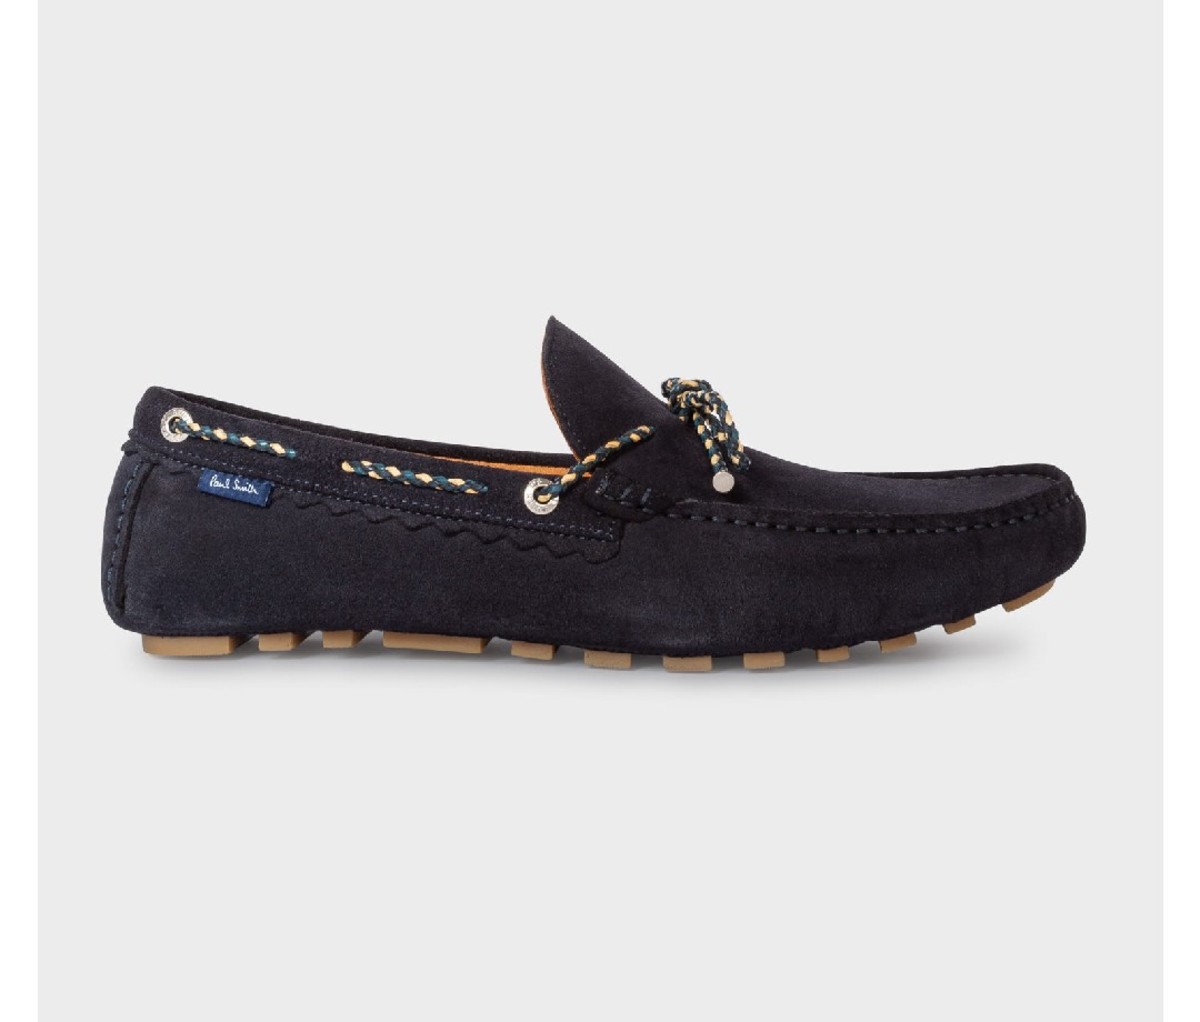 A PS by Paul Smith 'Springfield' Driving Loafer